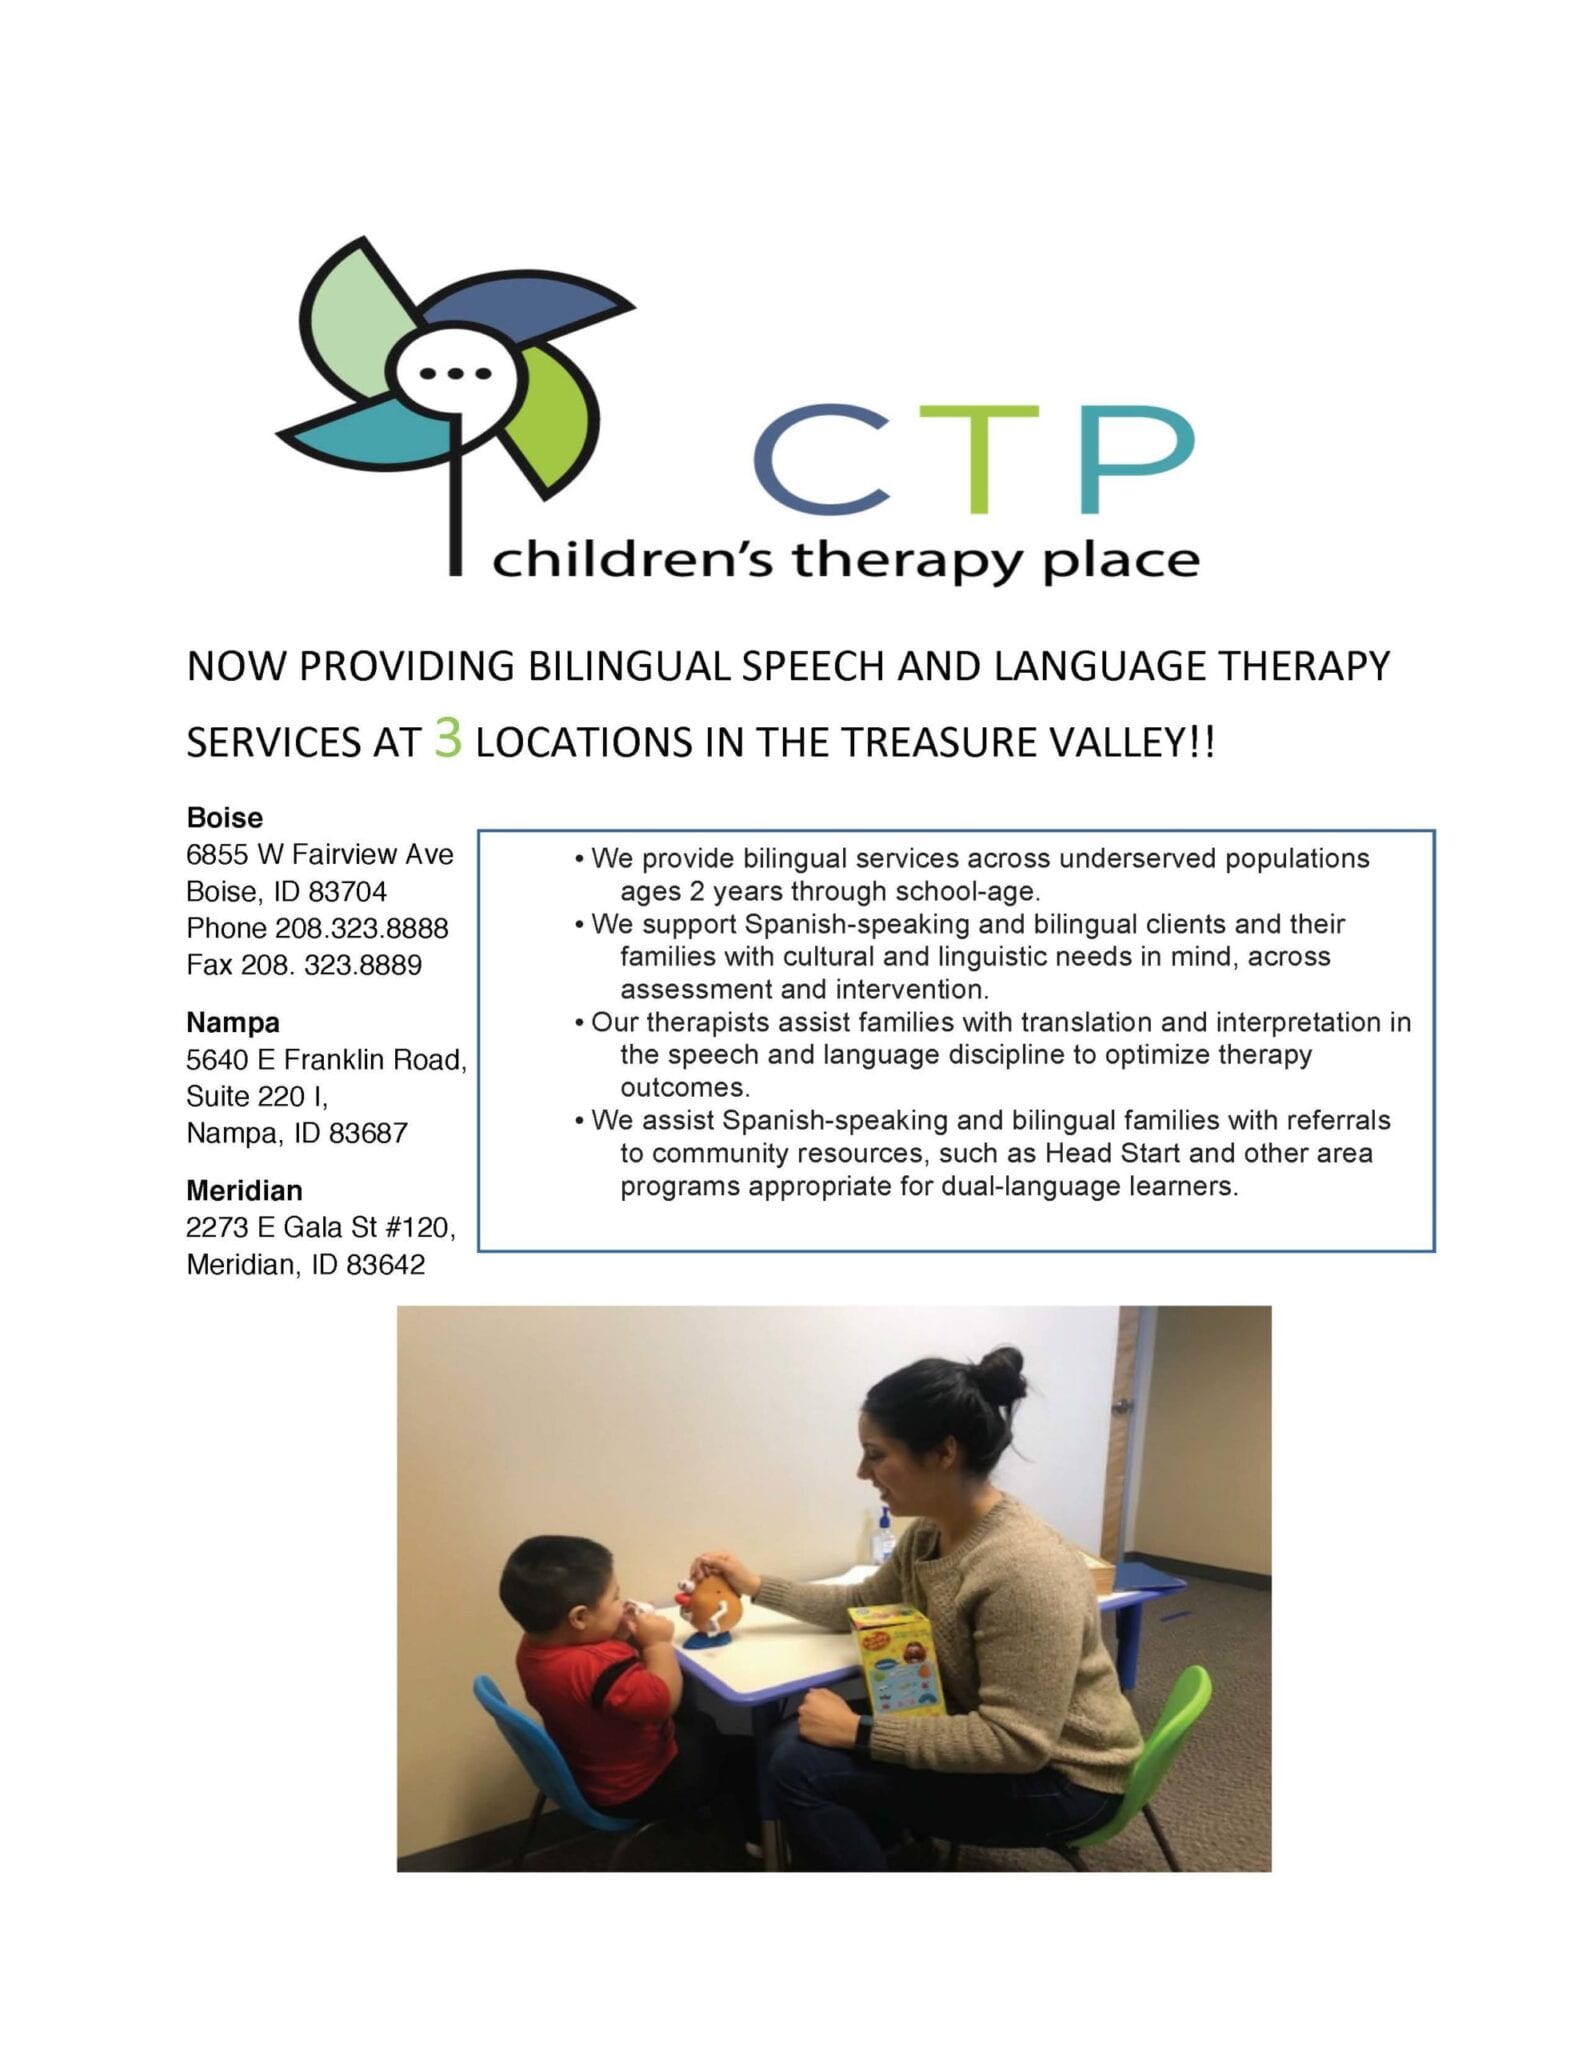 BILINGUAL SPEECH AND LANGUAGE THERAPY